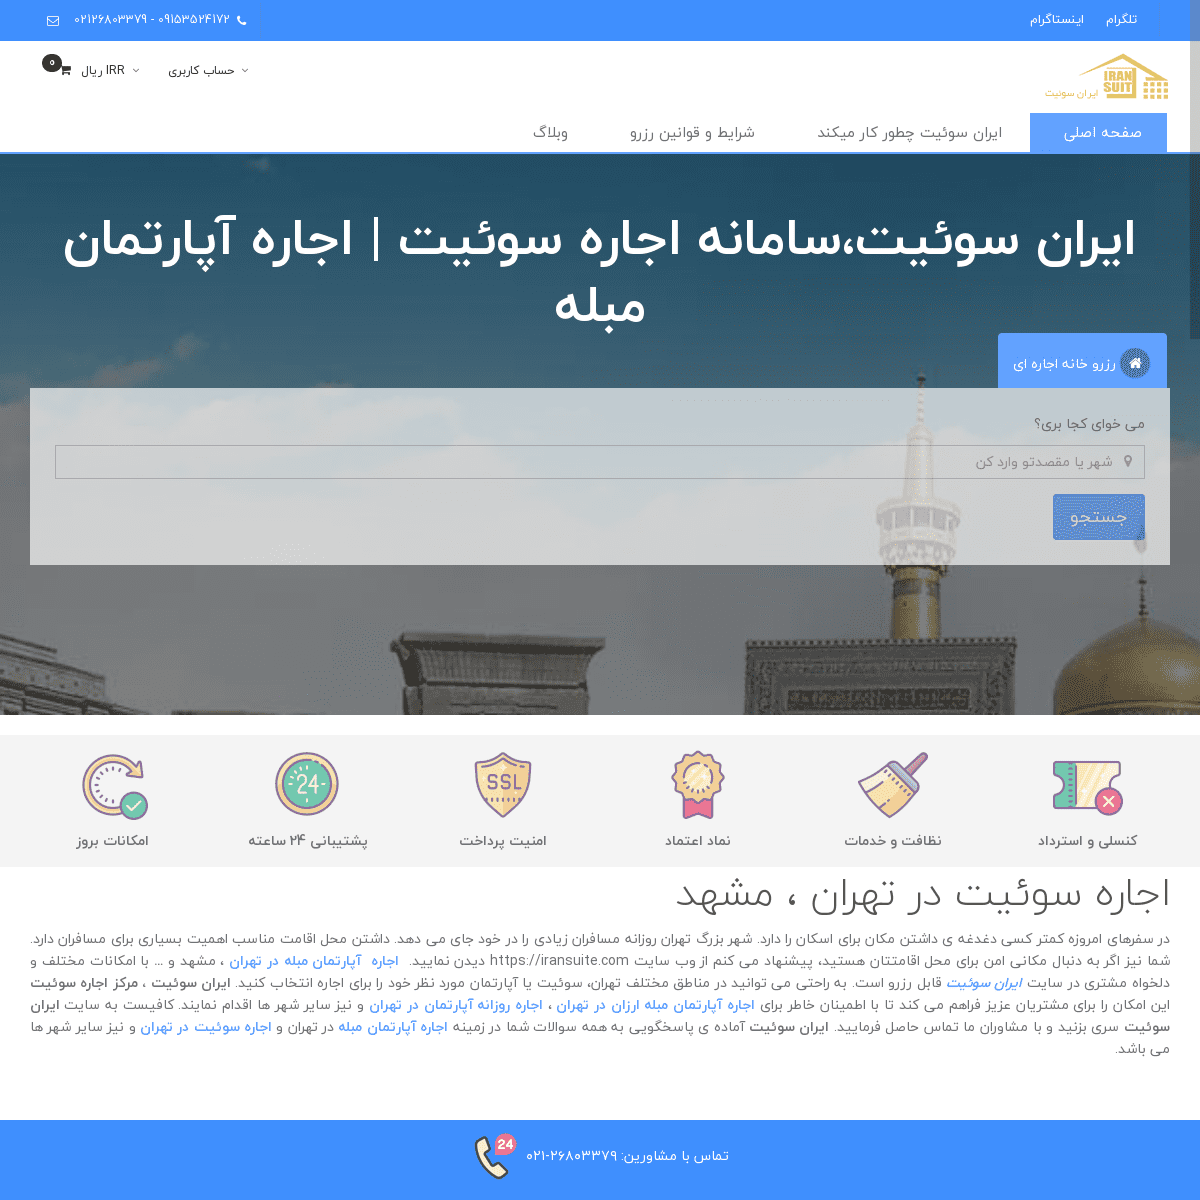 A complete backup of iransuite.com